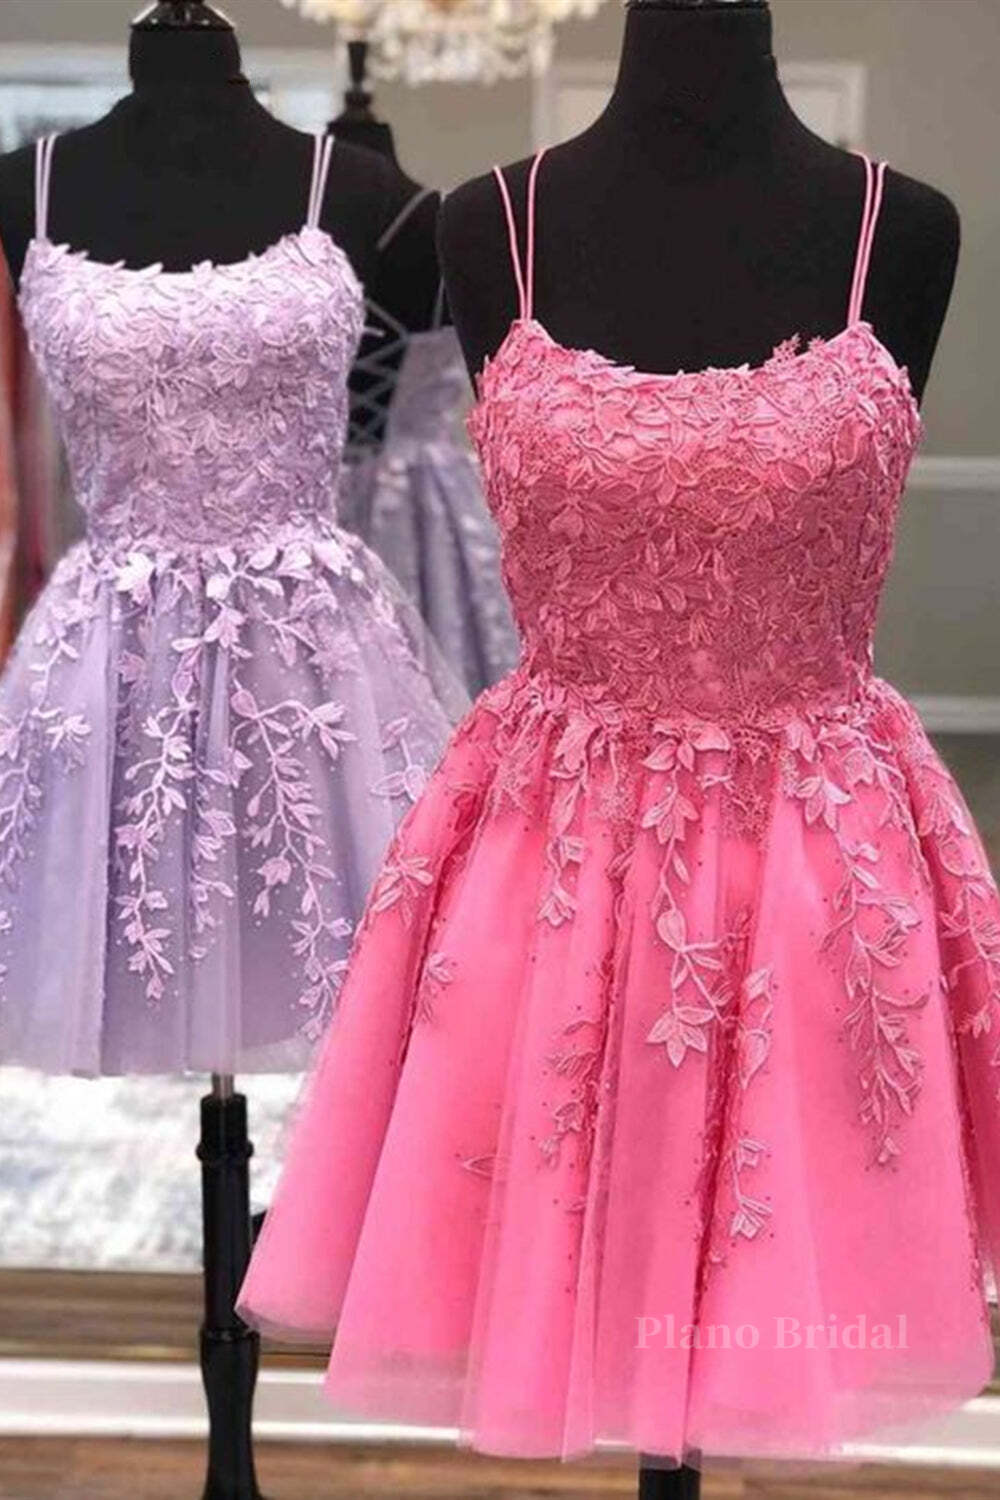 Cute Scoop Neck Lace Prom Homecoming Dresses, Short Lace Formal Evening Dresses